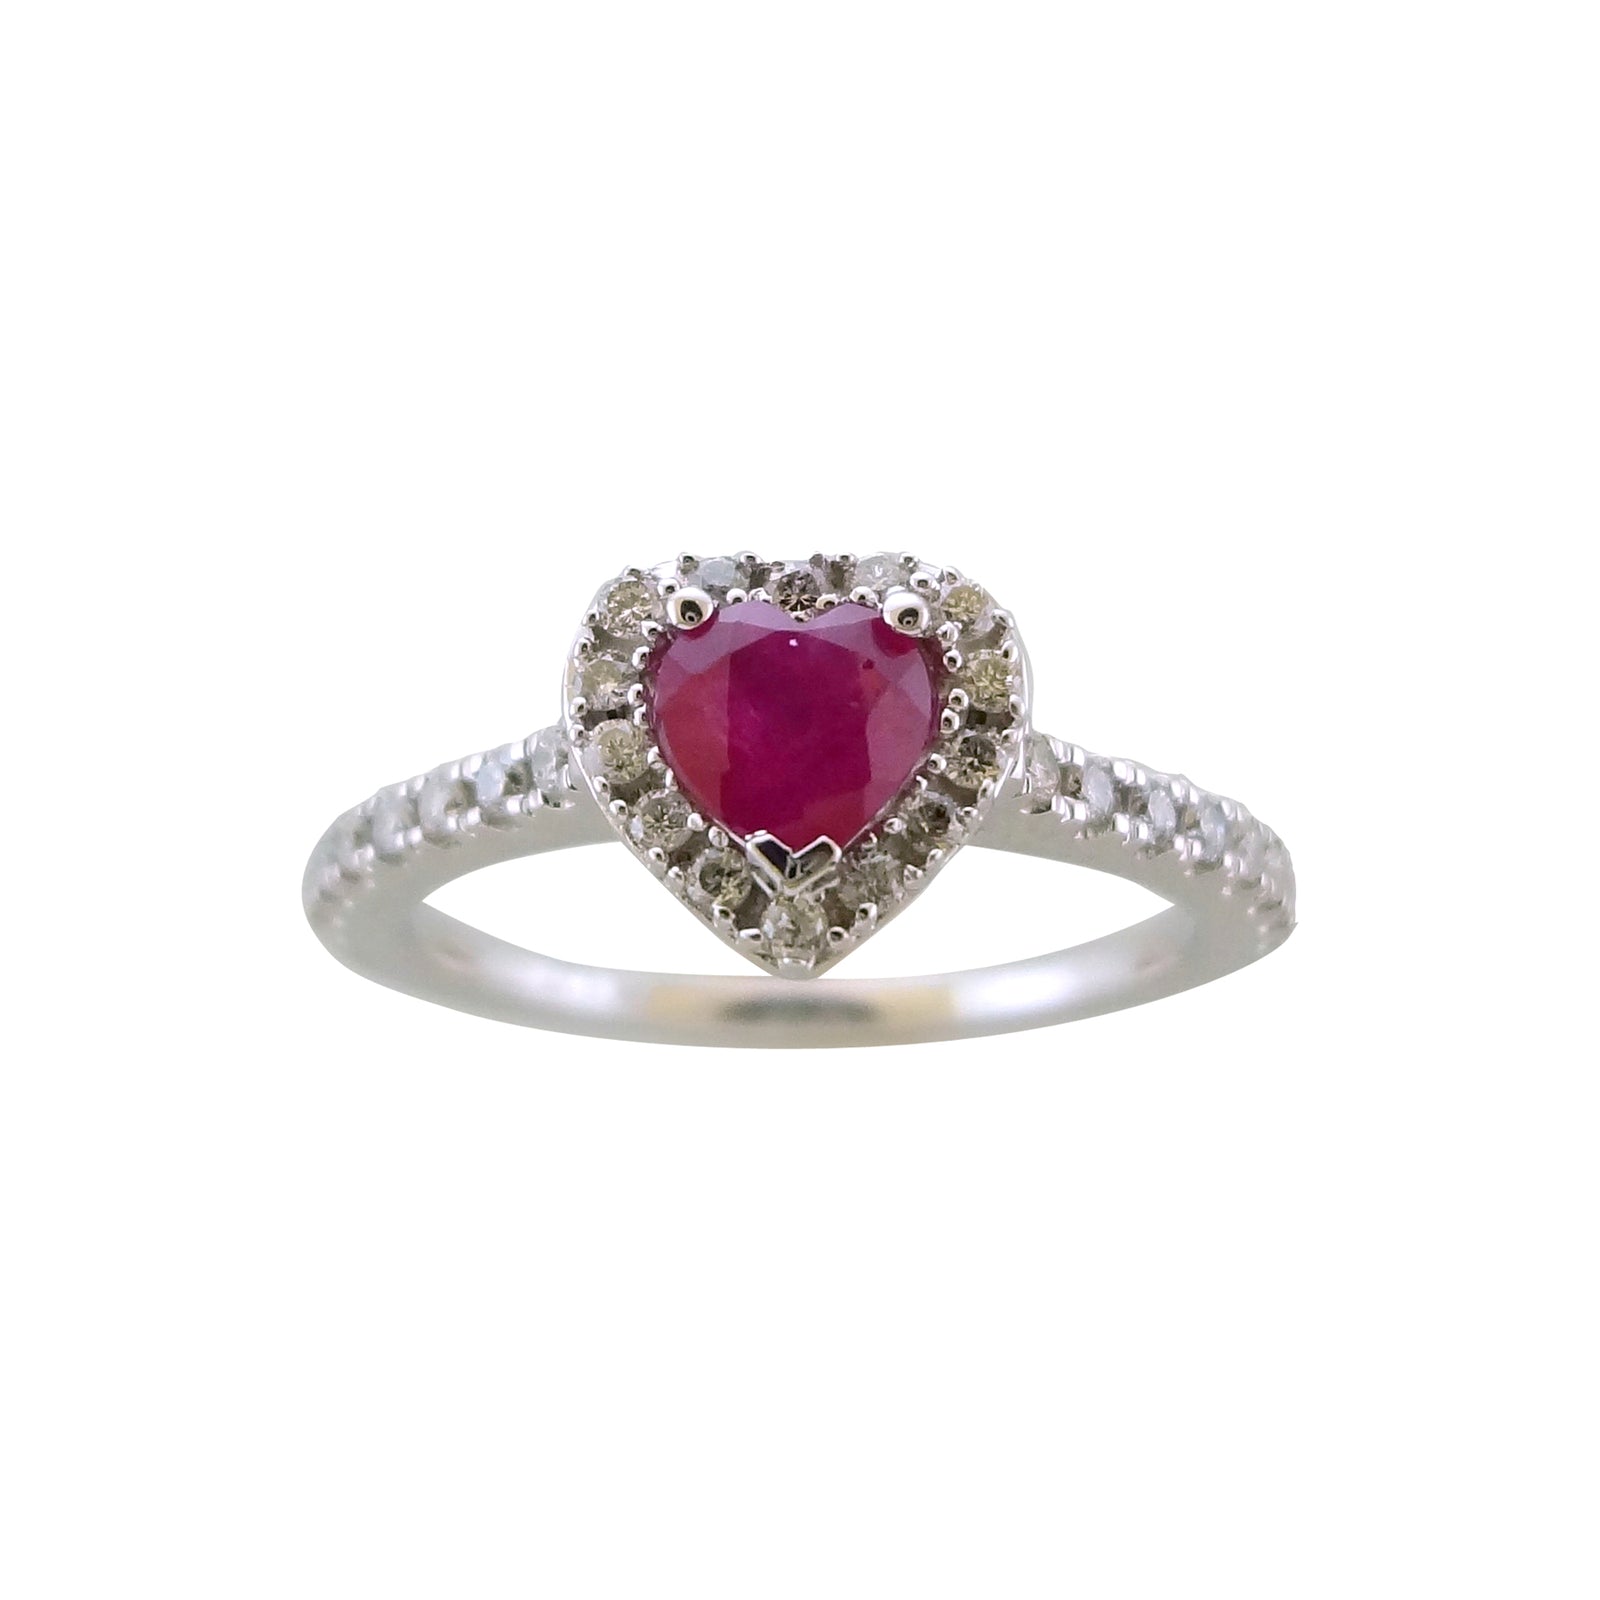 9ct white gold 5mm heart shape ruby & diamond cluster ring 0.25ct